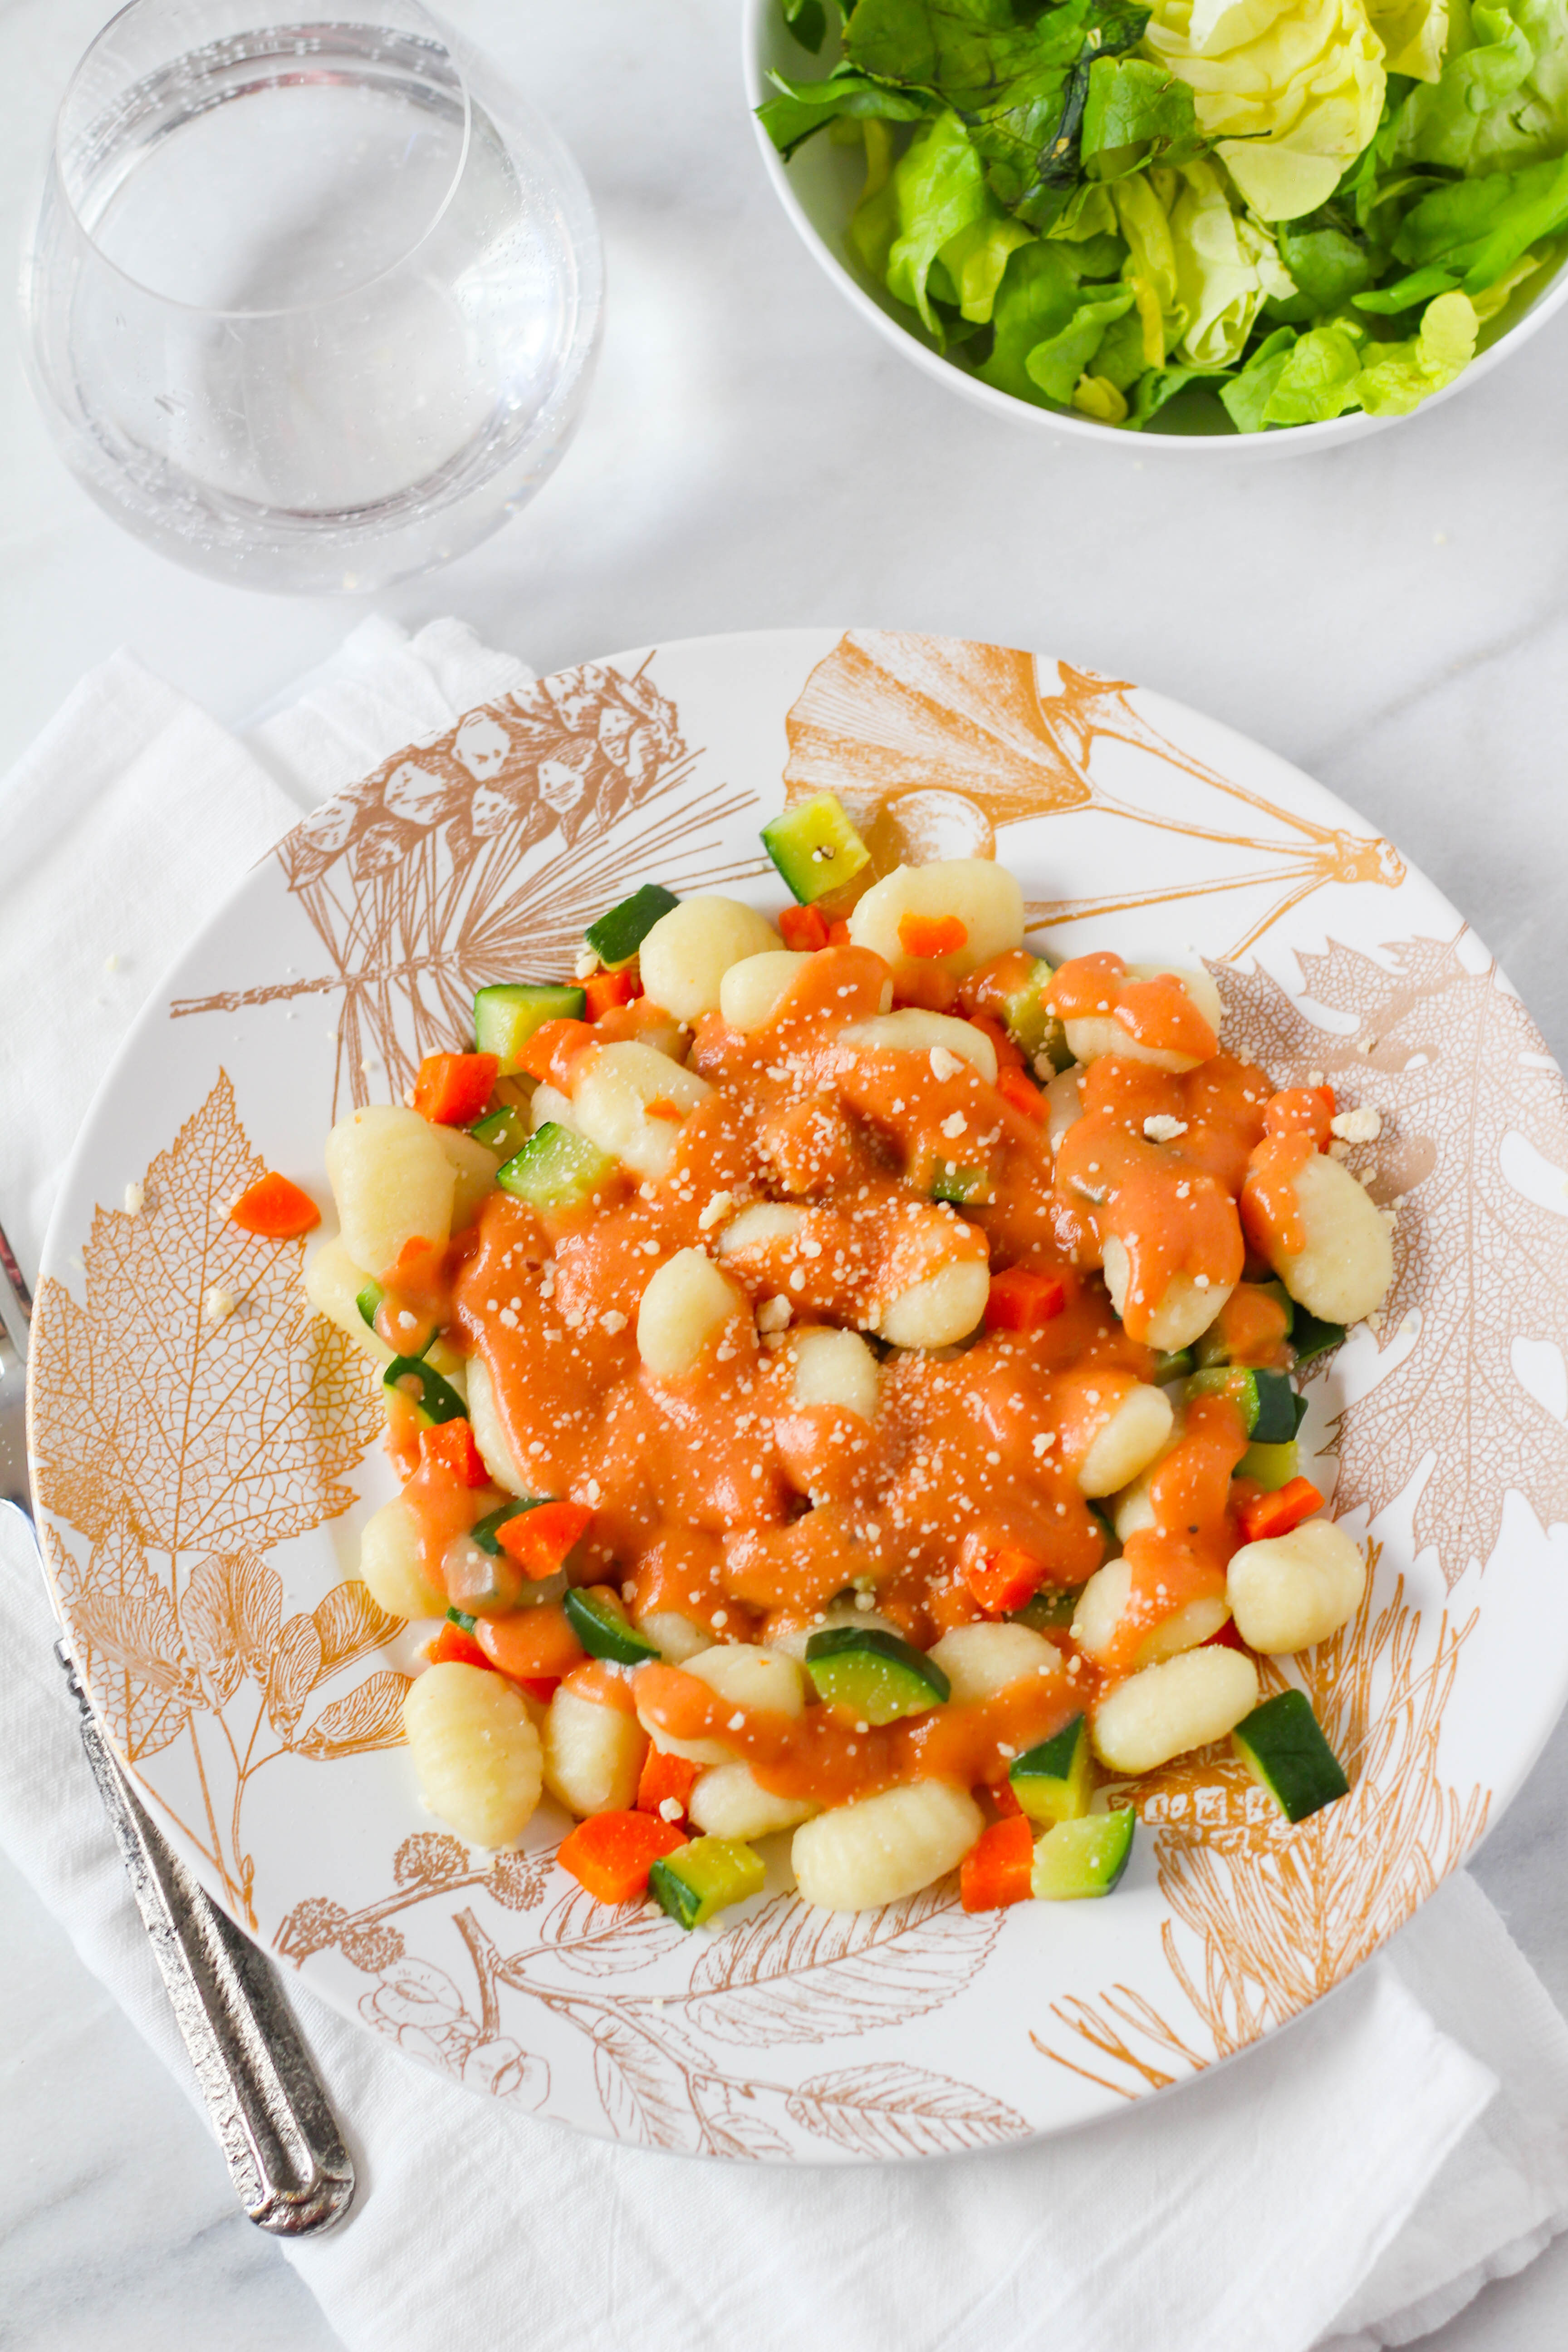 Tender gnocchi tossed with a French sauce made with bechamel, chicken stock and tomato puree with a deep, complex flavor. This Creamy Tomato Sauce tastes delicious with gnocchi and fresh vegetables! 